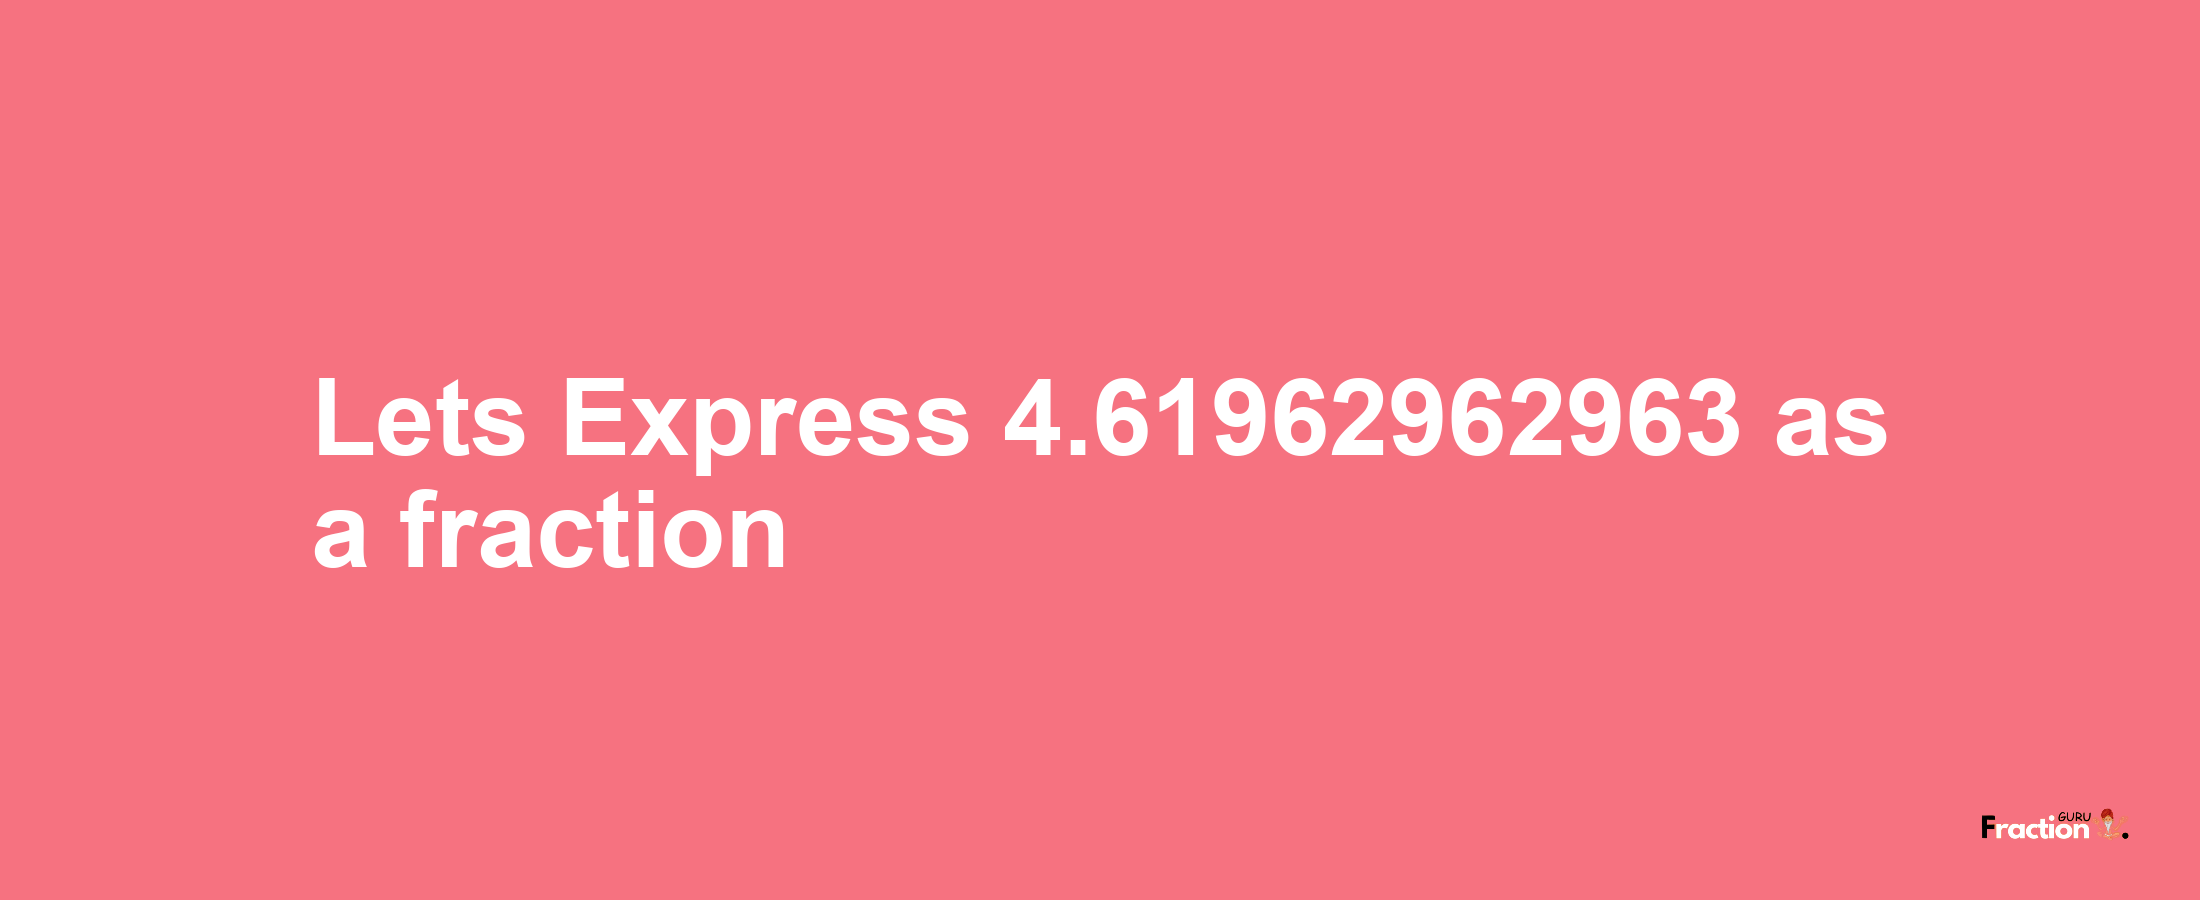 Lets Express 4.61962962963 as afraction